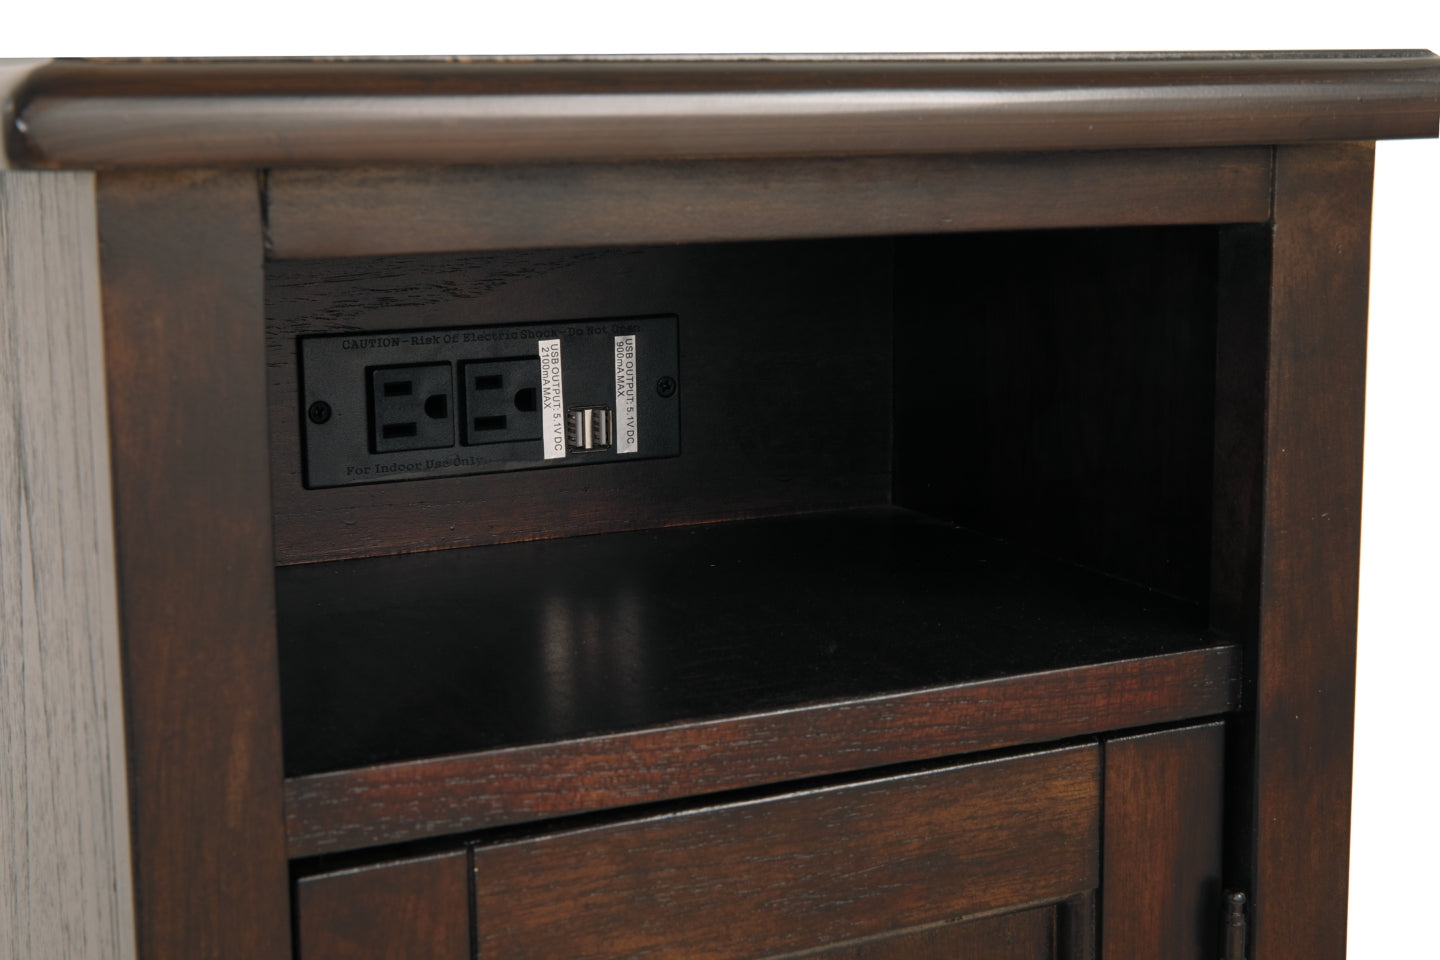 Barilanni Chairside End Table with USB Ports & Outlets